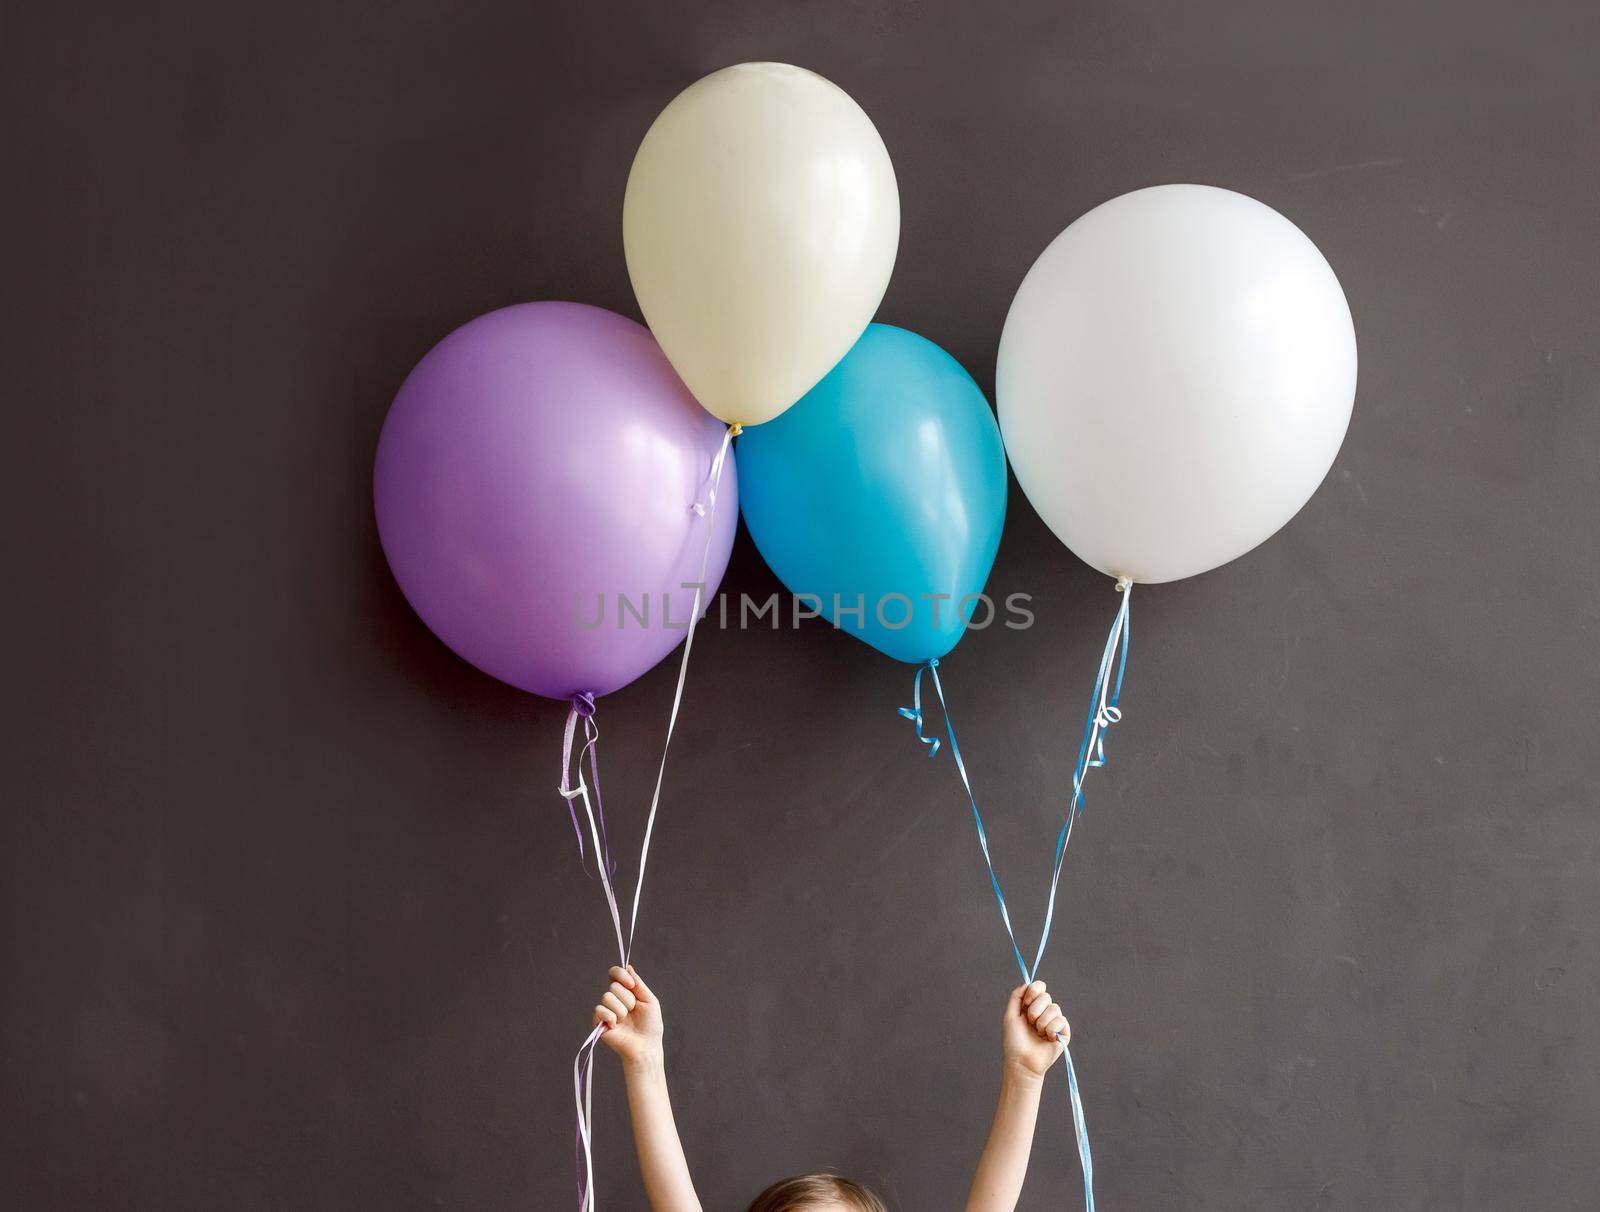 Little child holding colorful balloons by Demkat